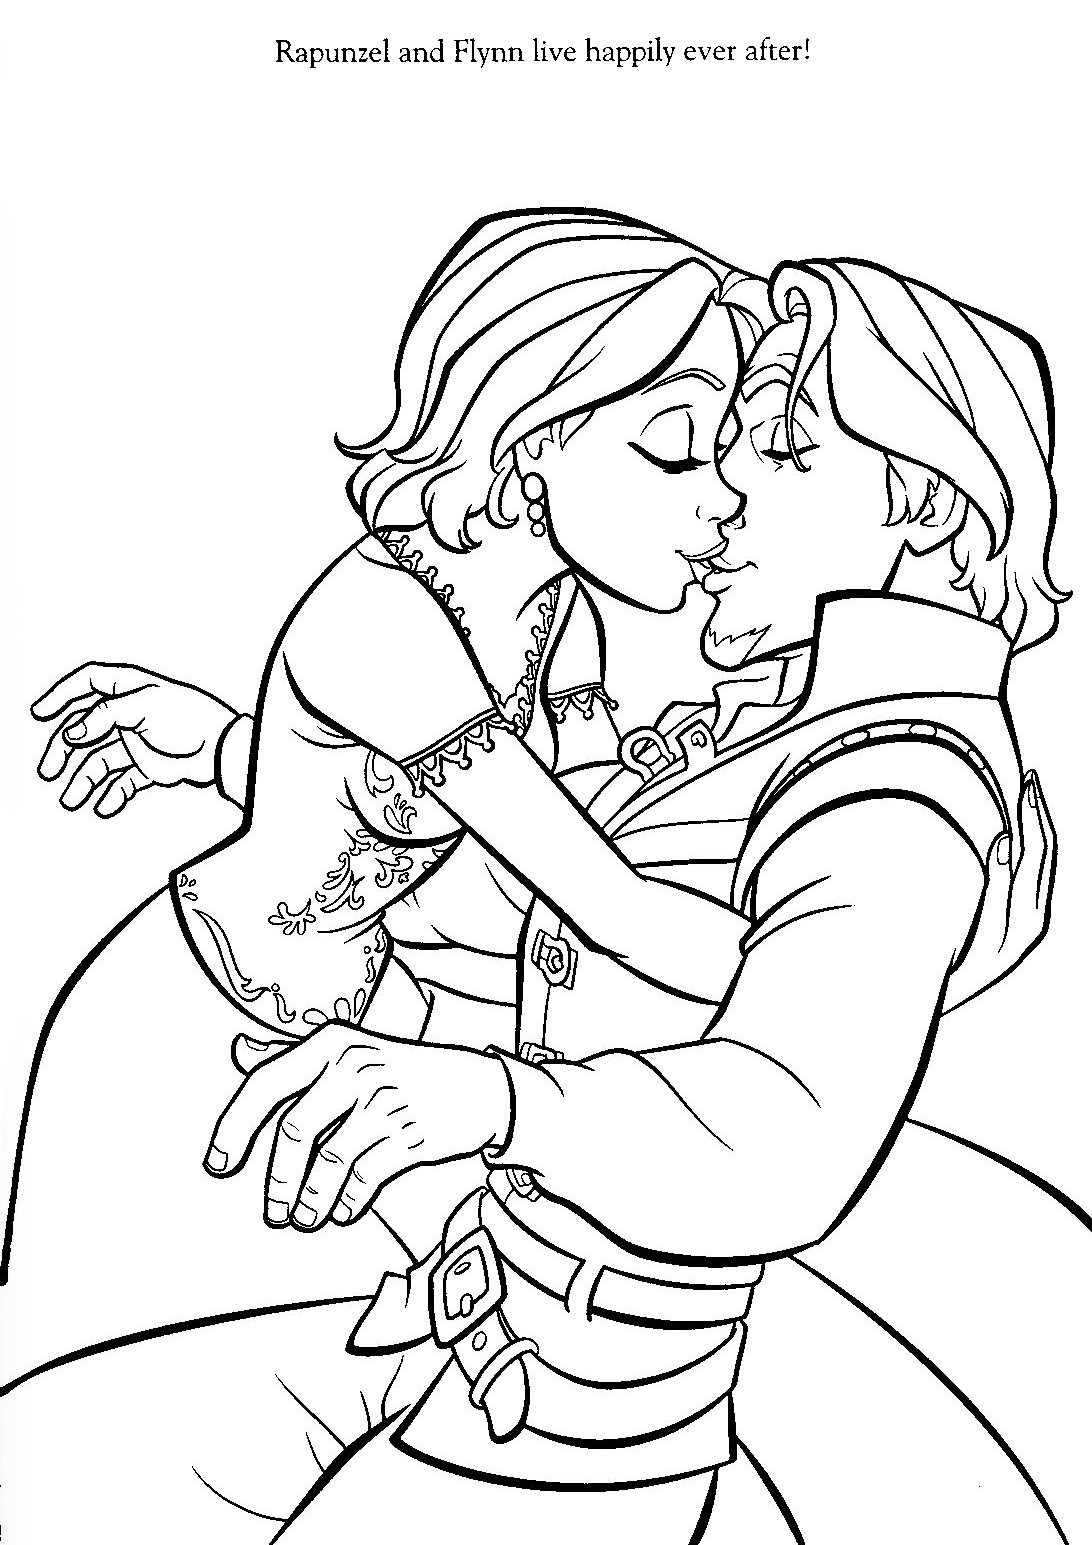 Rapunzel Short Hair and Flynn Rider Got Married Happily Ever after Tangled Coloring Pages